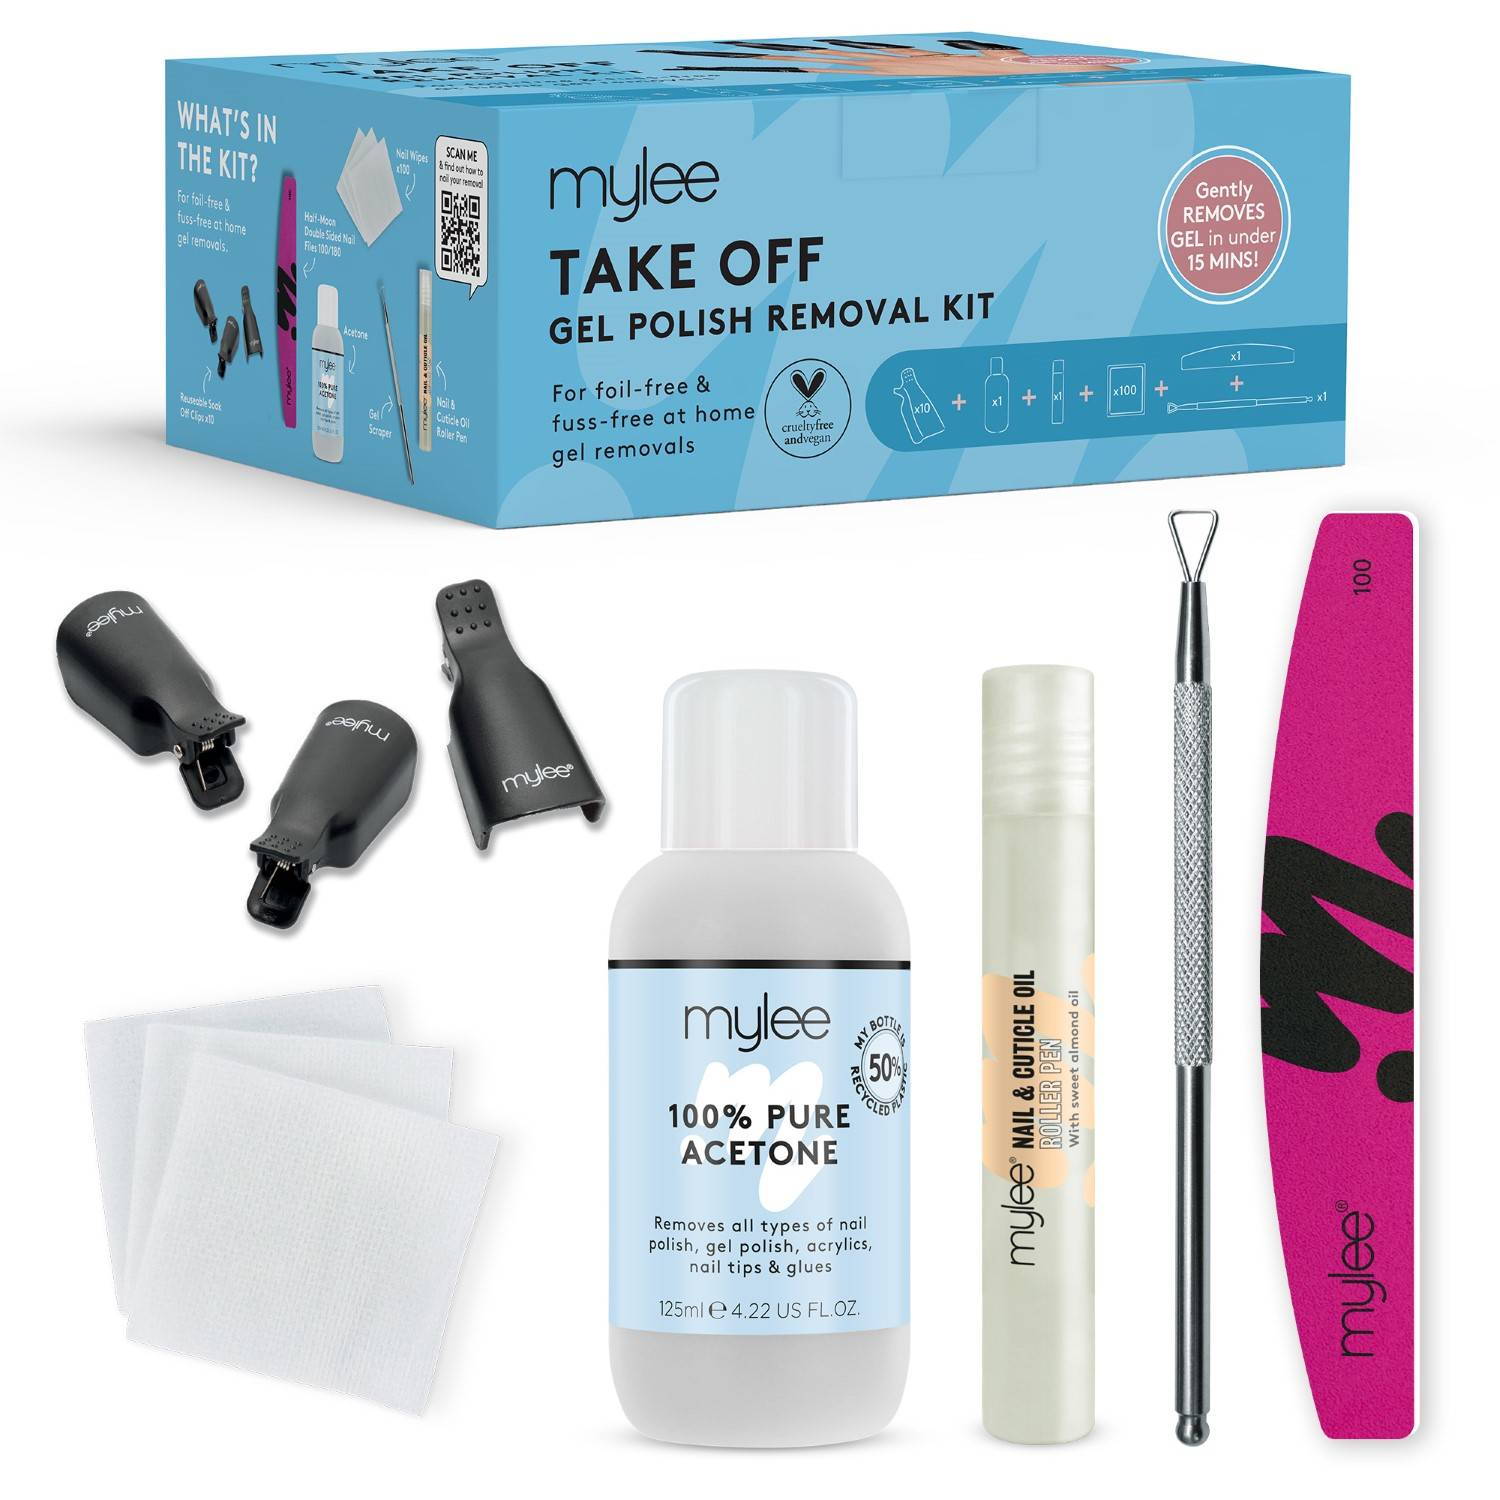 Mylee Take Off Nail Gel Polish Removal Kit - Includes Acetone; Reusable Clips; Nail Wipes; Nail File; Cuticle Oil Pen & Gel Scraper